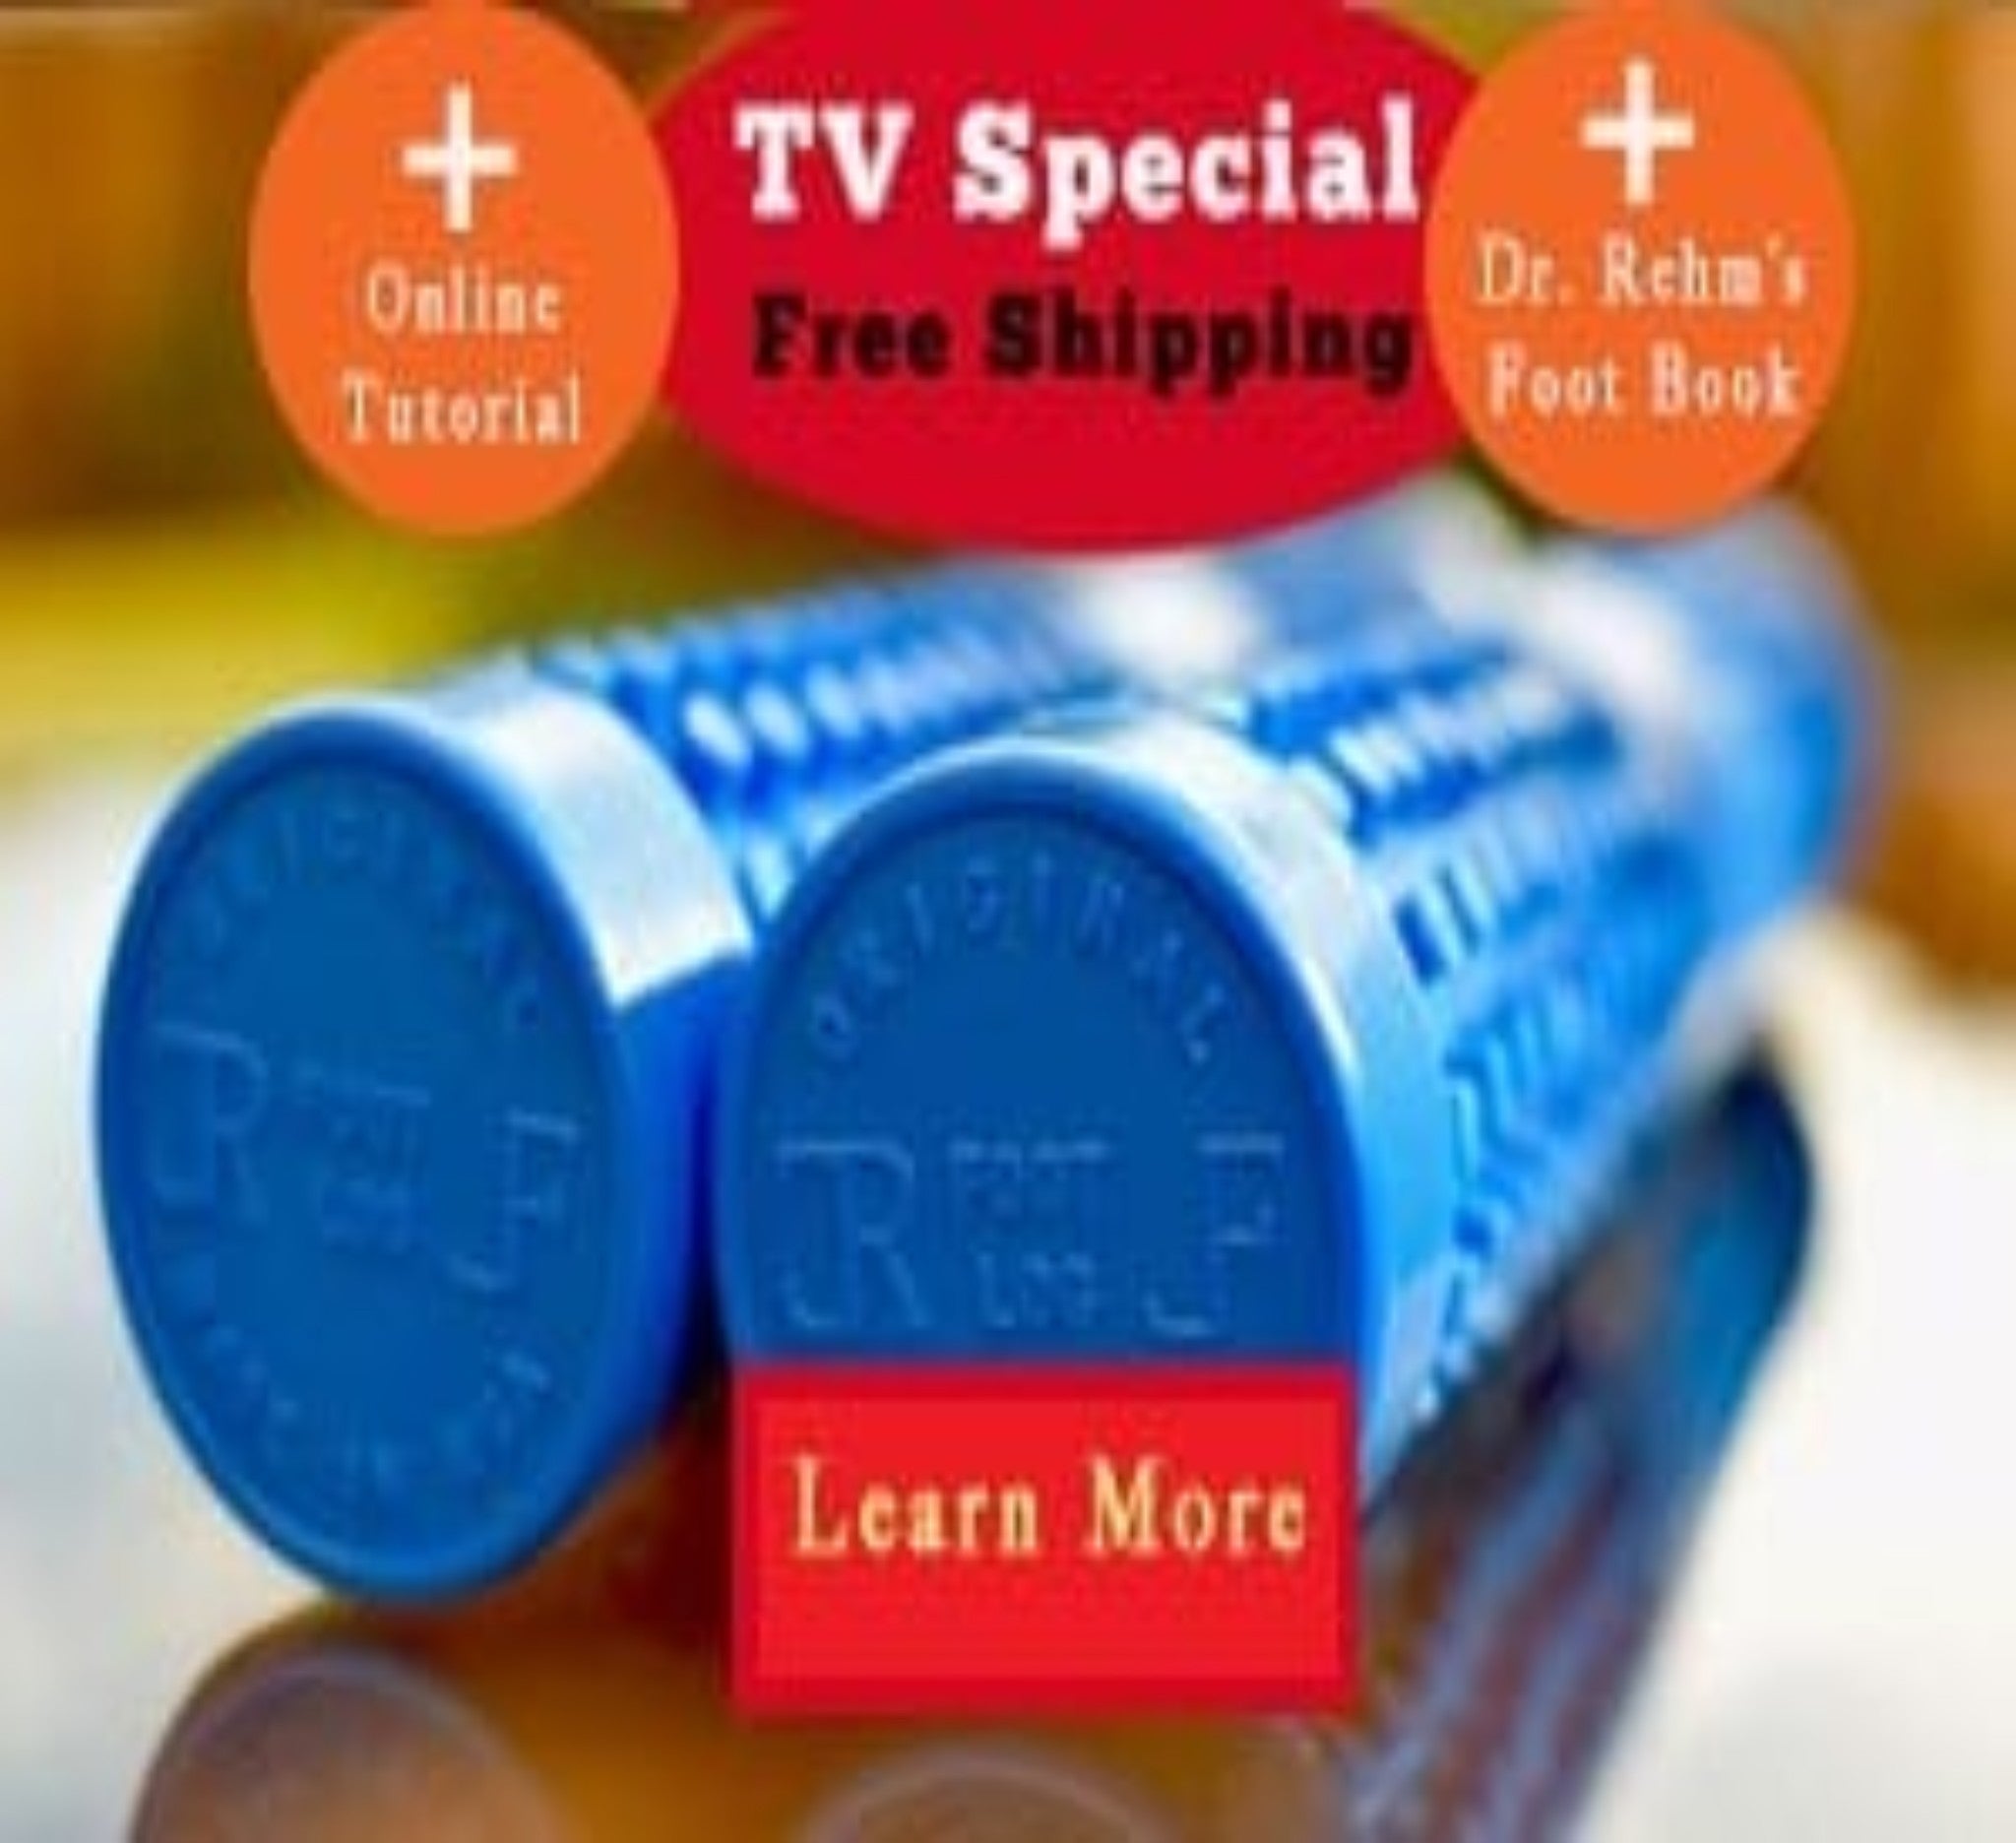 2 Installments: 2 FootLogs (Blue) Bundle + Free Shipping – TV SPECIAL